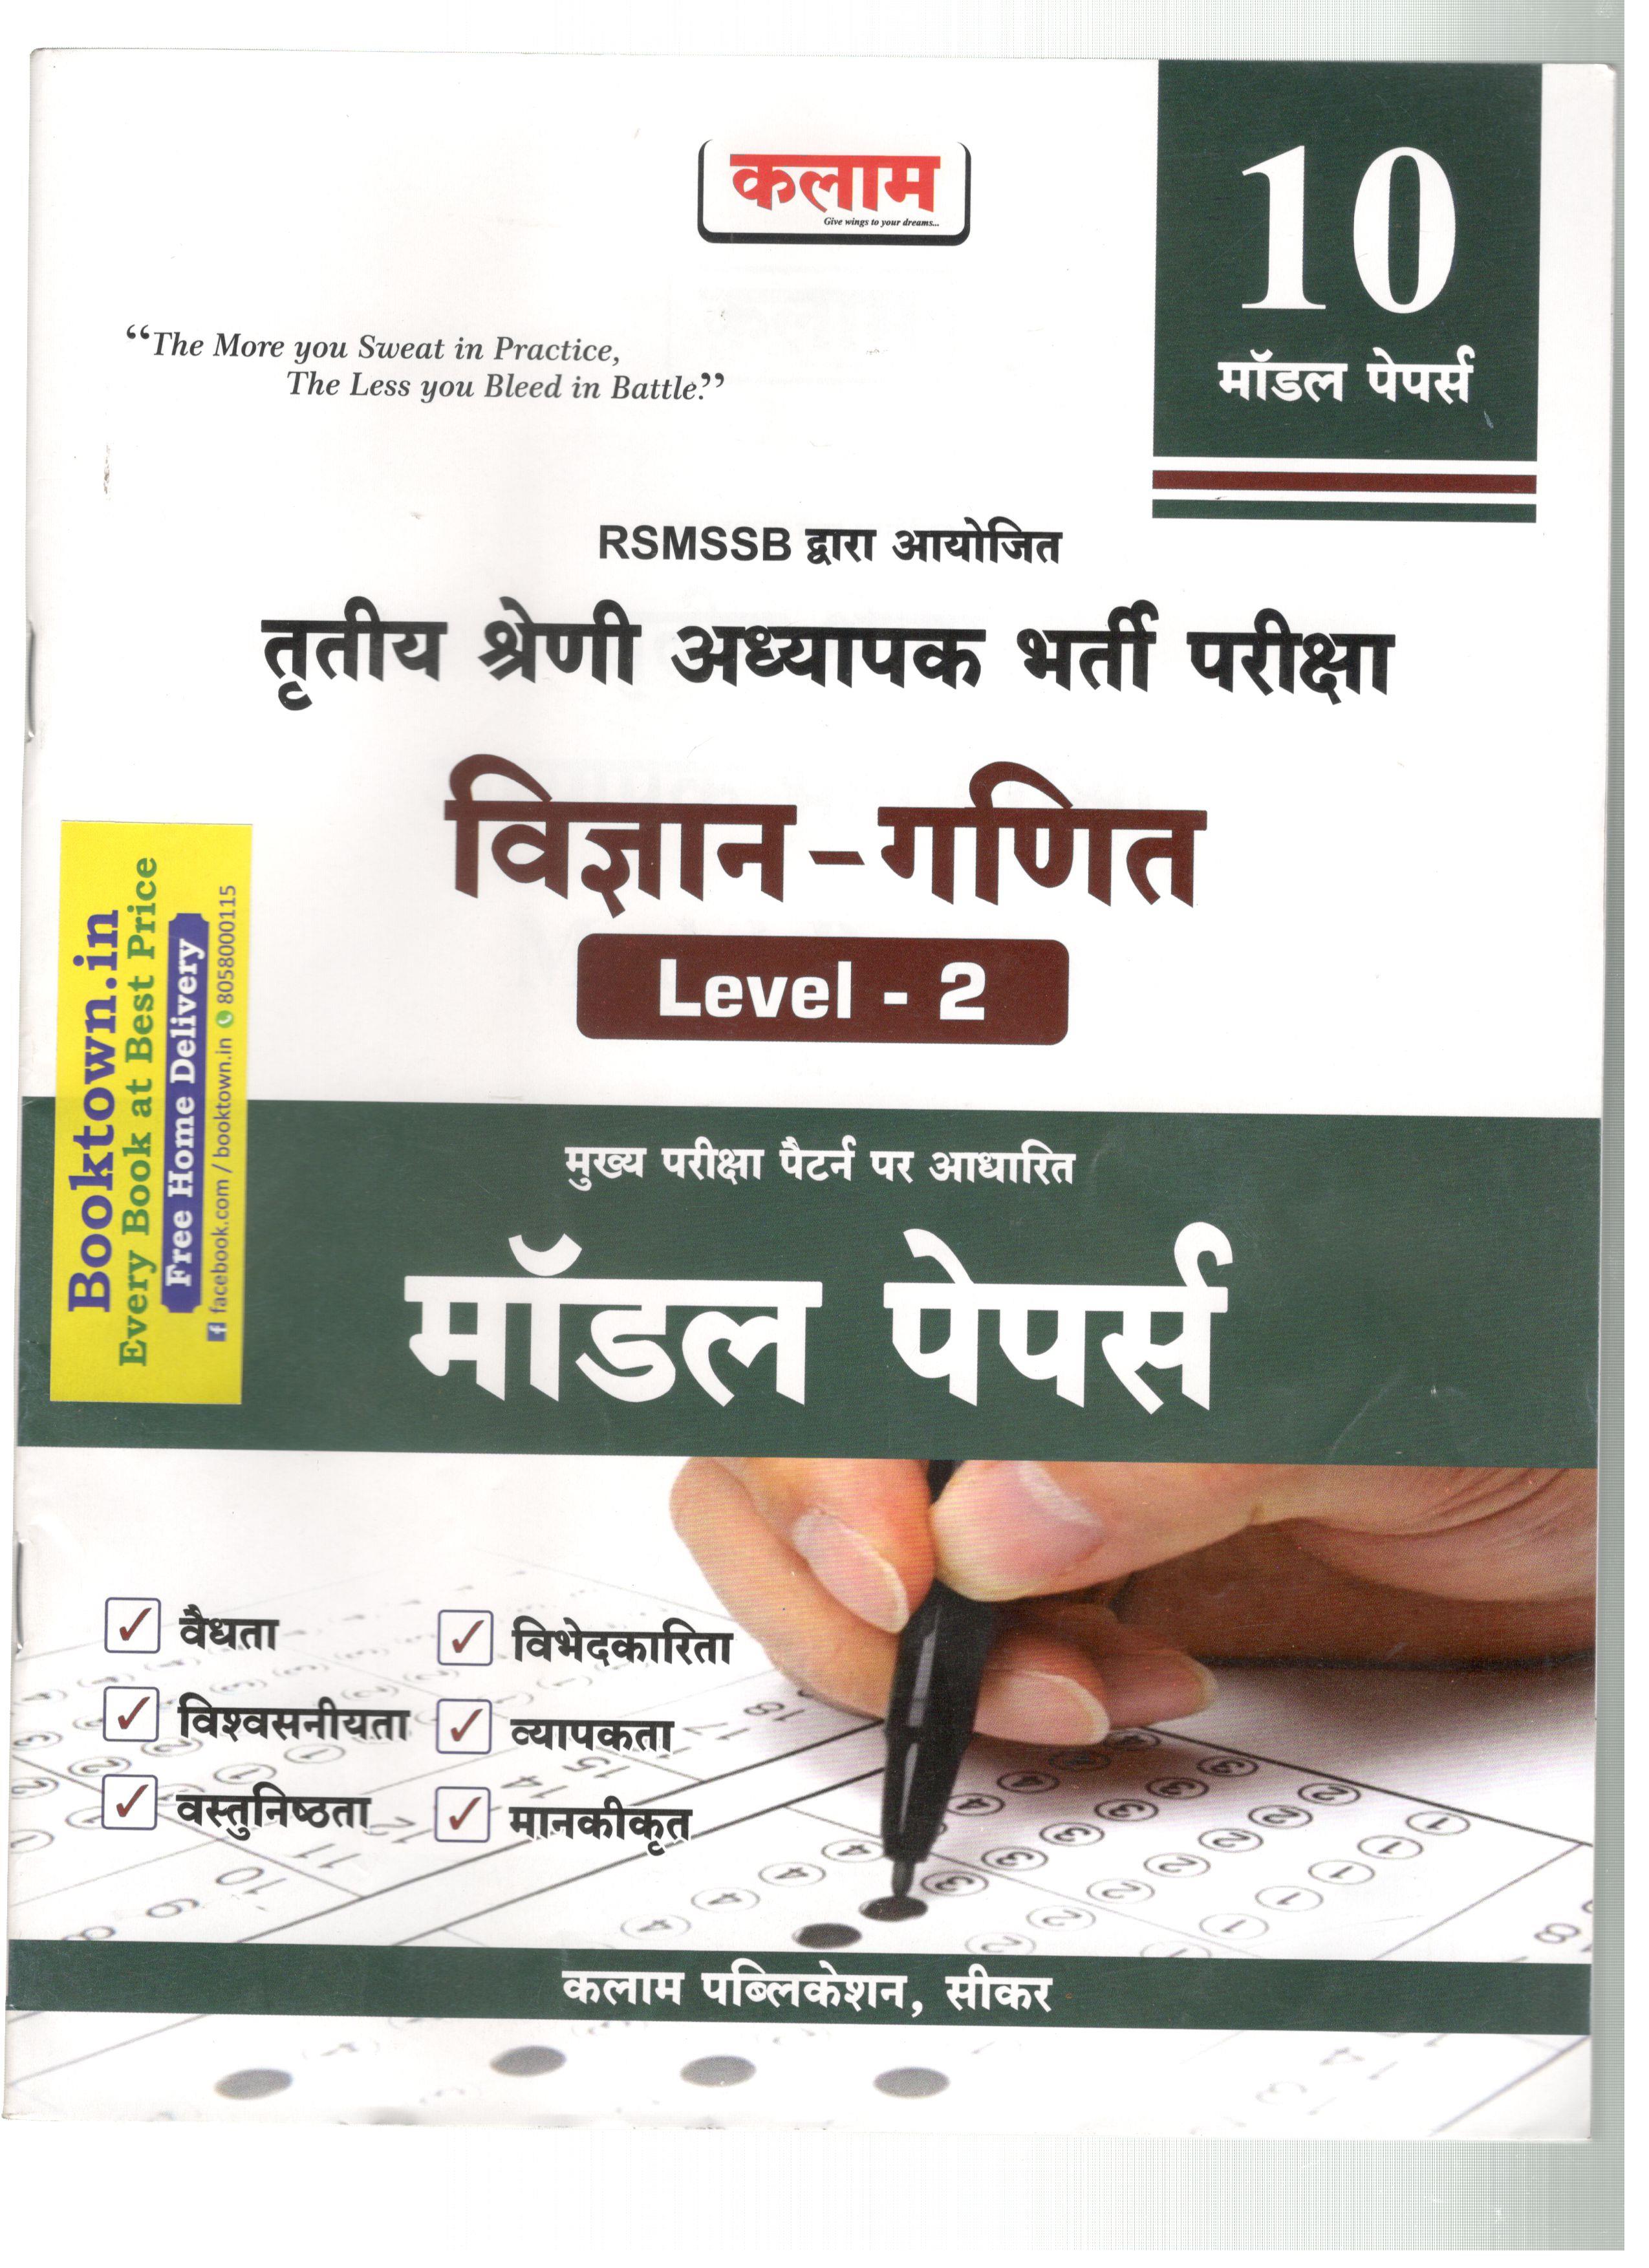 Kalam Math And Science 10 Model Paper For Third Grade Teacher Reet Mains Exam Latest Edition